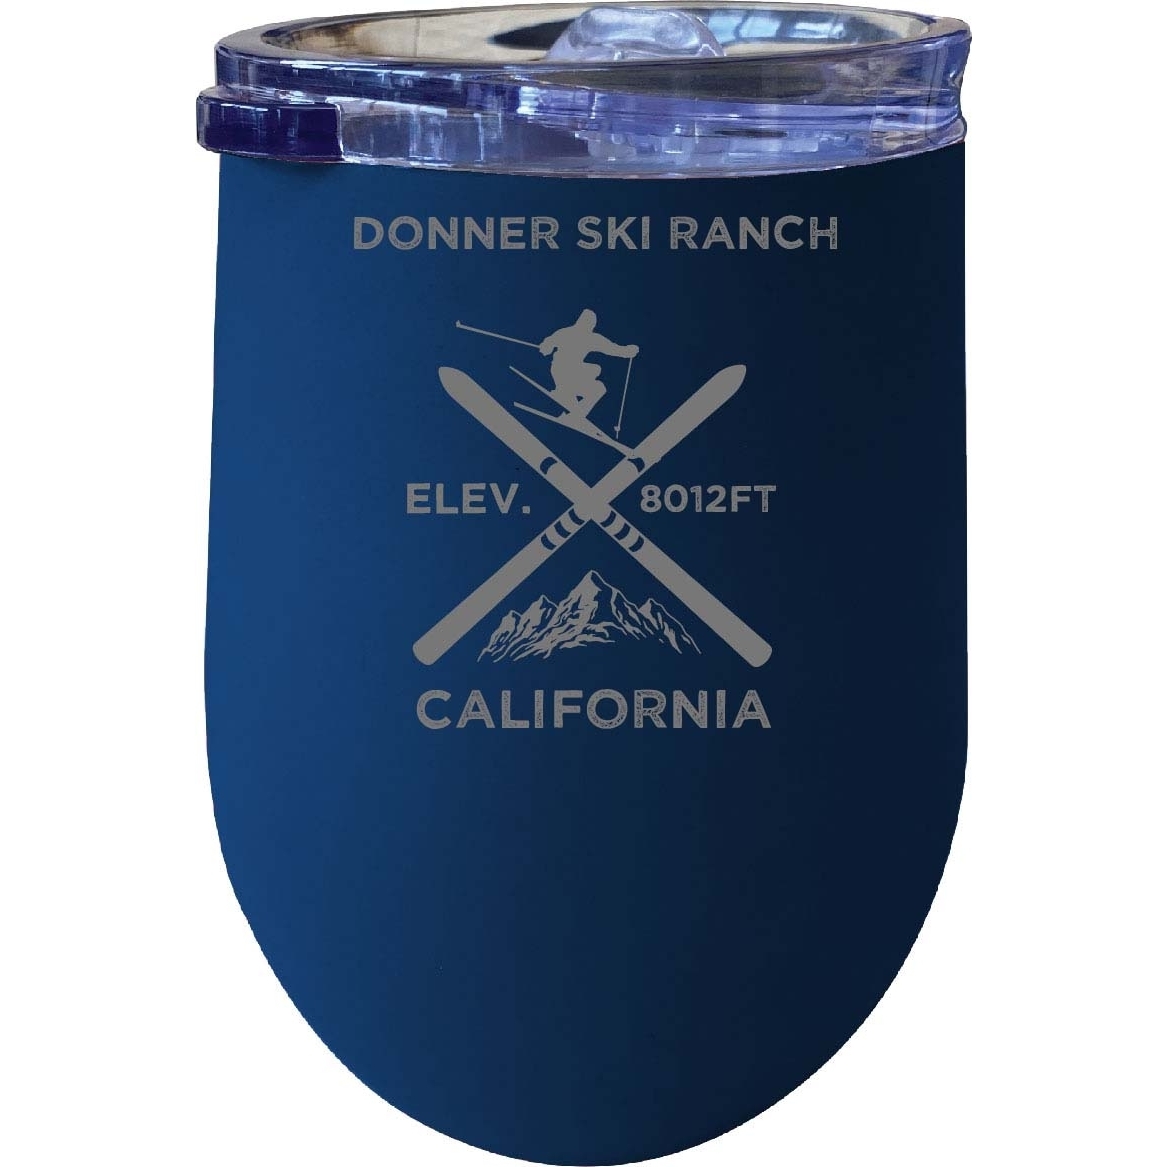 Donner Ski Ranch California Ski Souvenir 12 Oz Laser Etched Insulated Wine Stainless Steel Tumbler - Navy